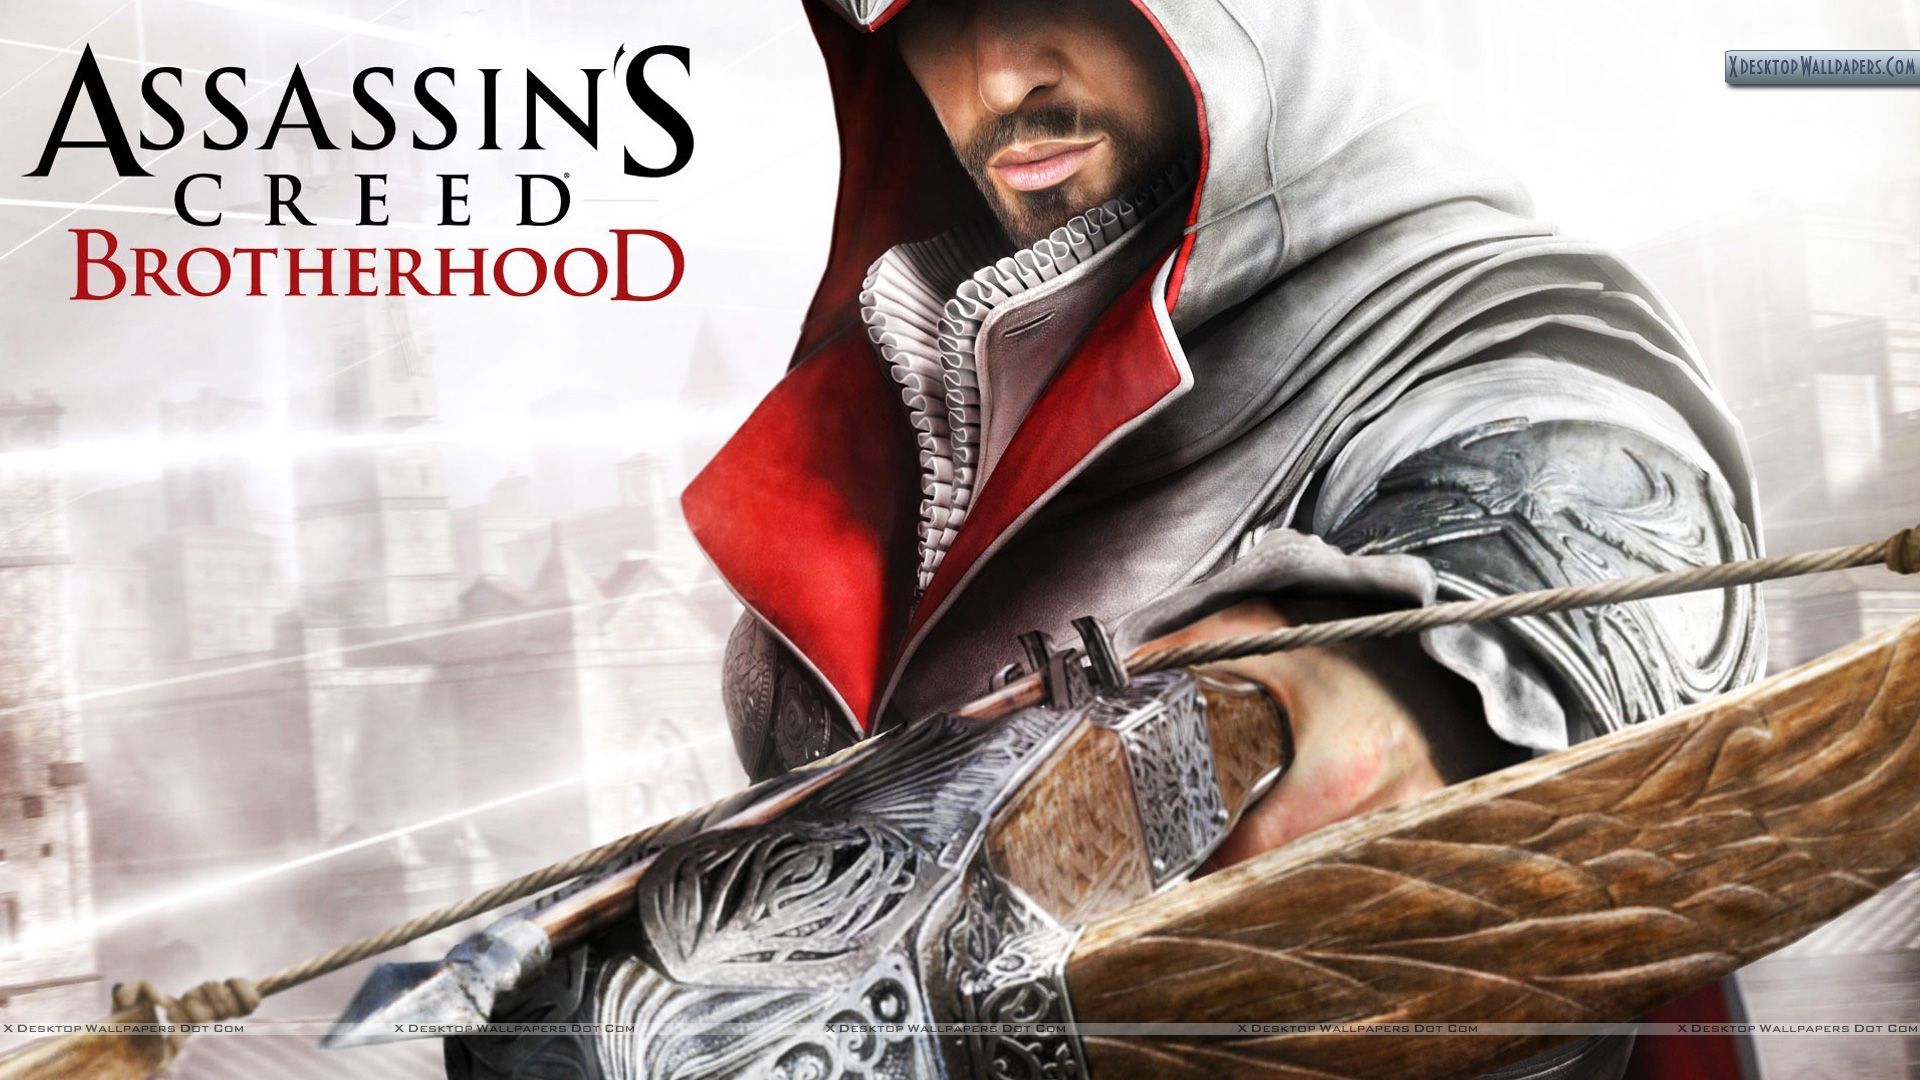 Ezio With Crossbow in Assassins Creed Brotherhood Wallpaper